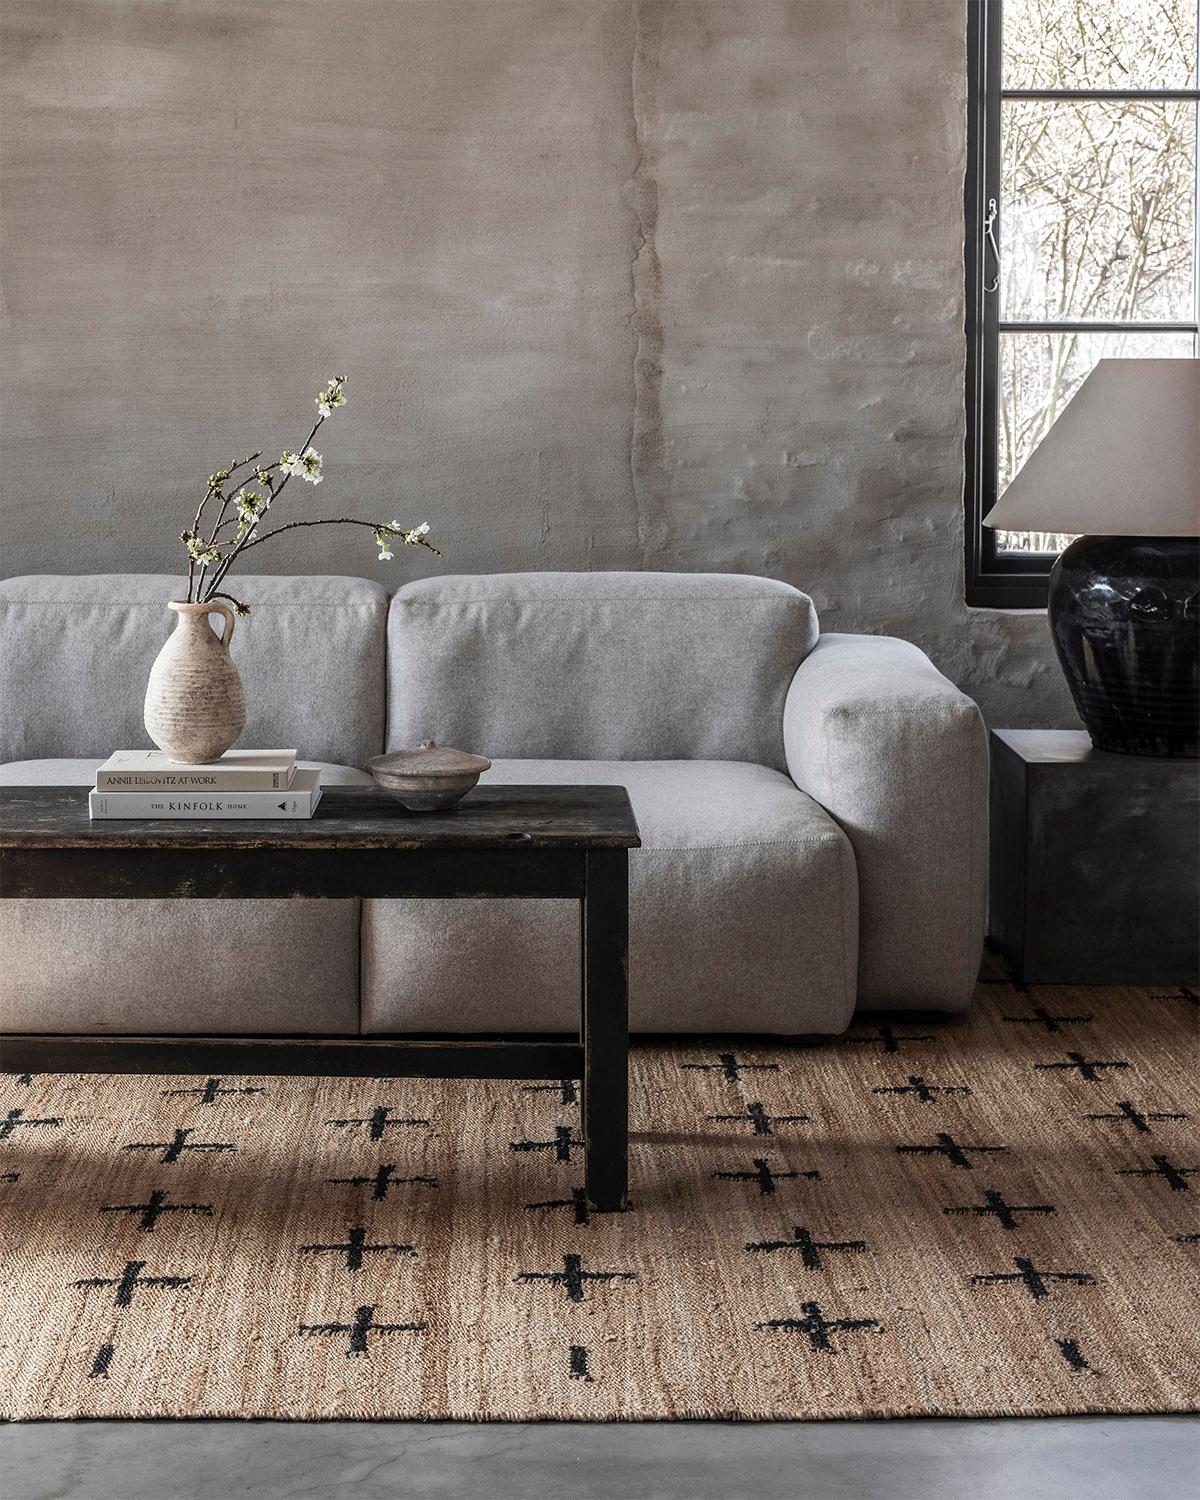 The Jute collection is woven with strong all-natural plant fibers in a modern rustic design. Equally as rugged as Minimalist. Available in three different patterns using our signature cream, teal, and black colors as accents. The rugs are a